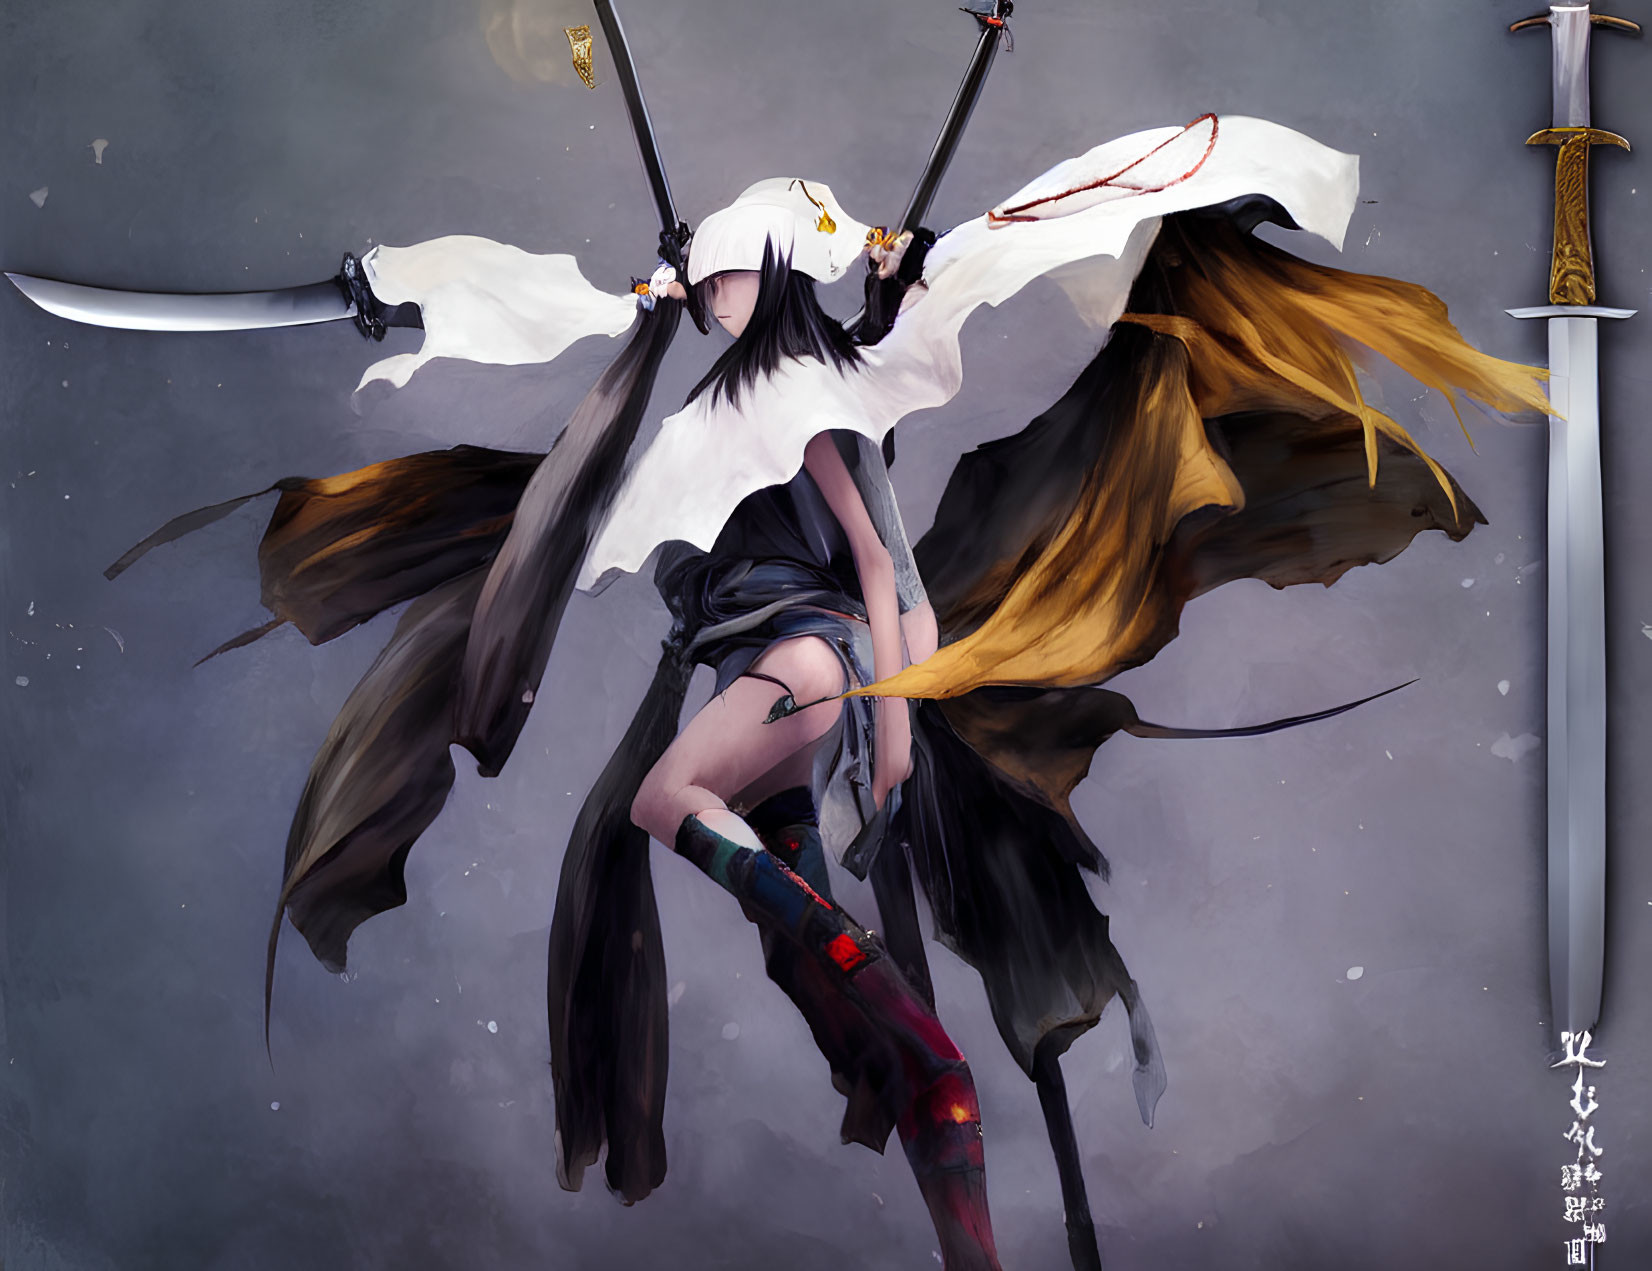 Female anime-style warrior with dual swords and white cape in dynamic illustration